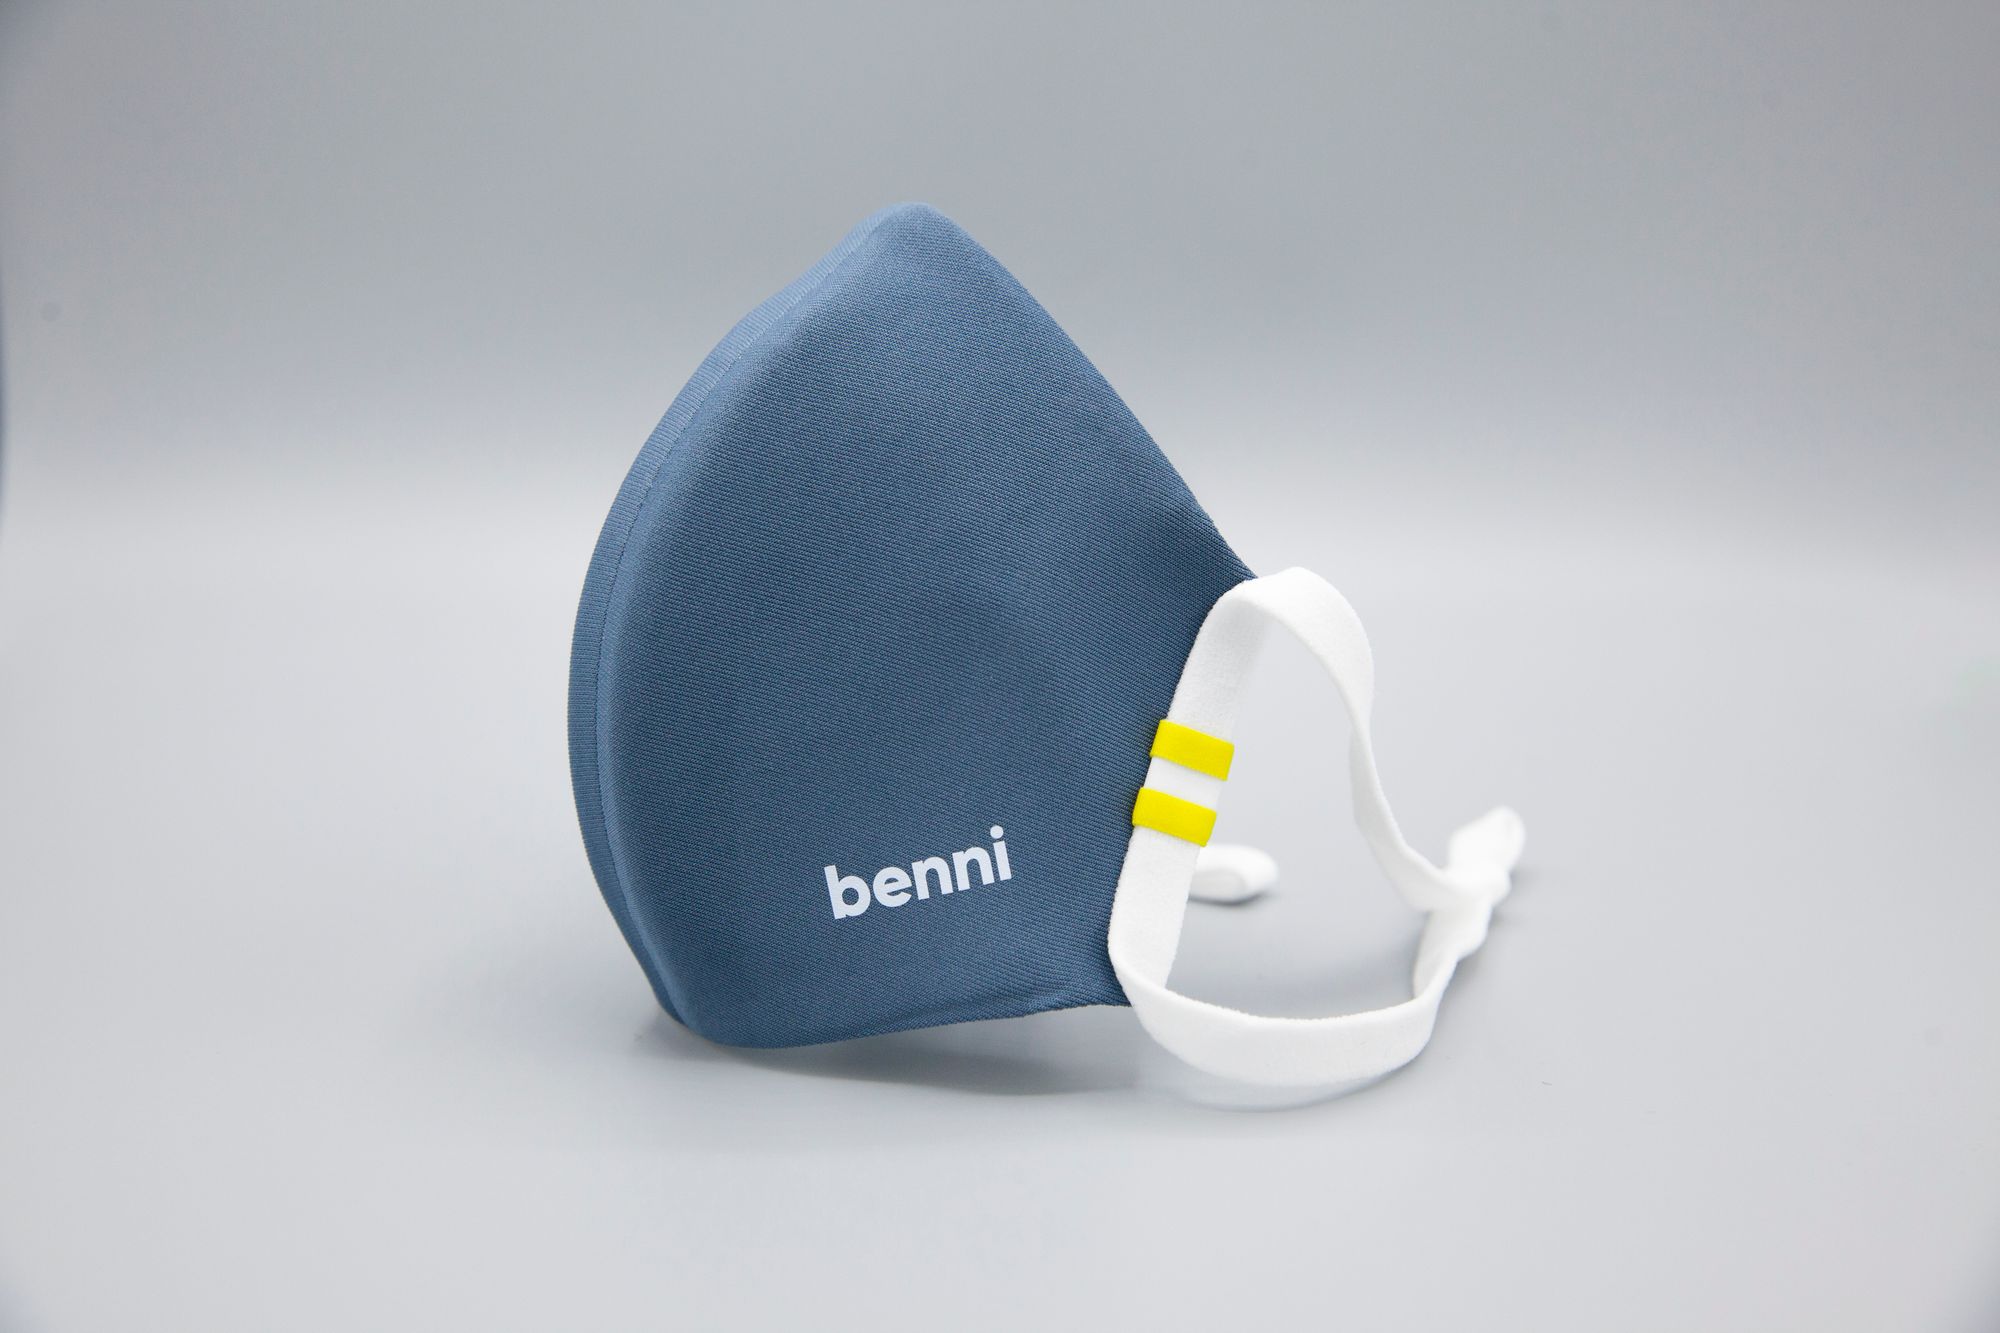 How to Use Your Benni's Nose Clip